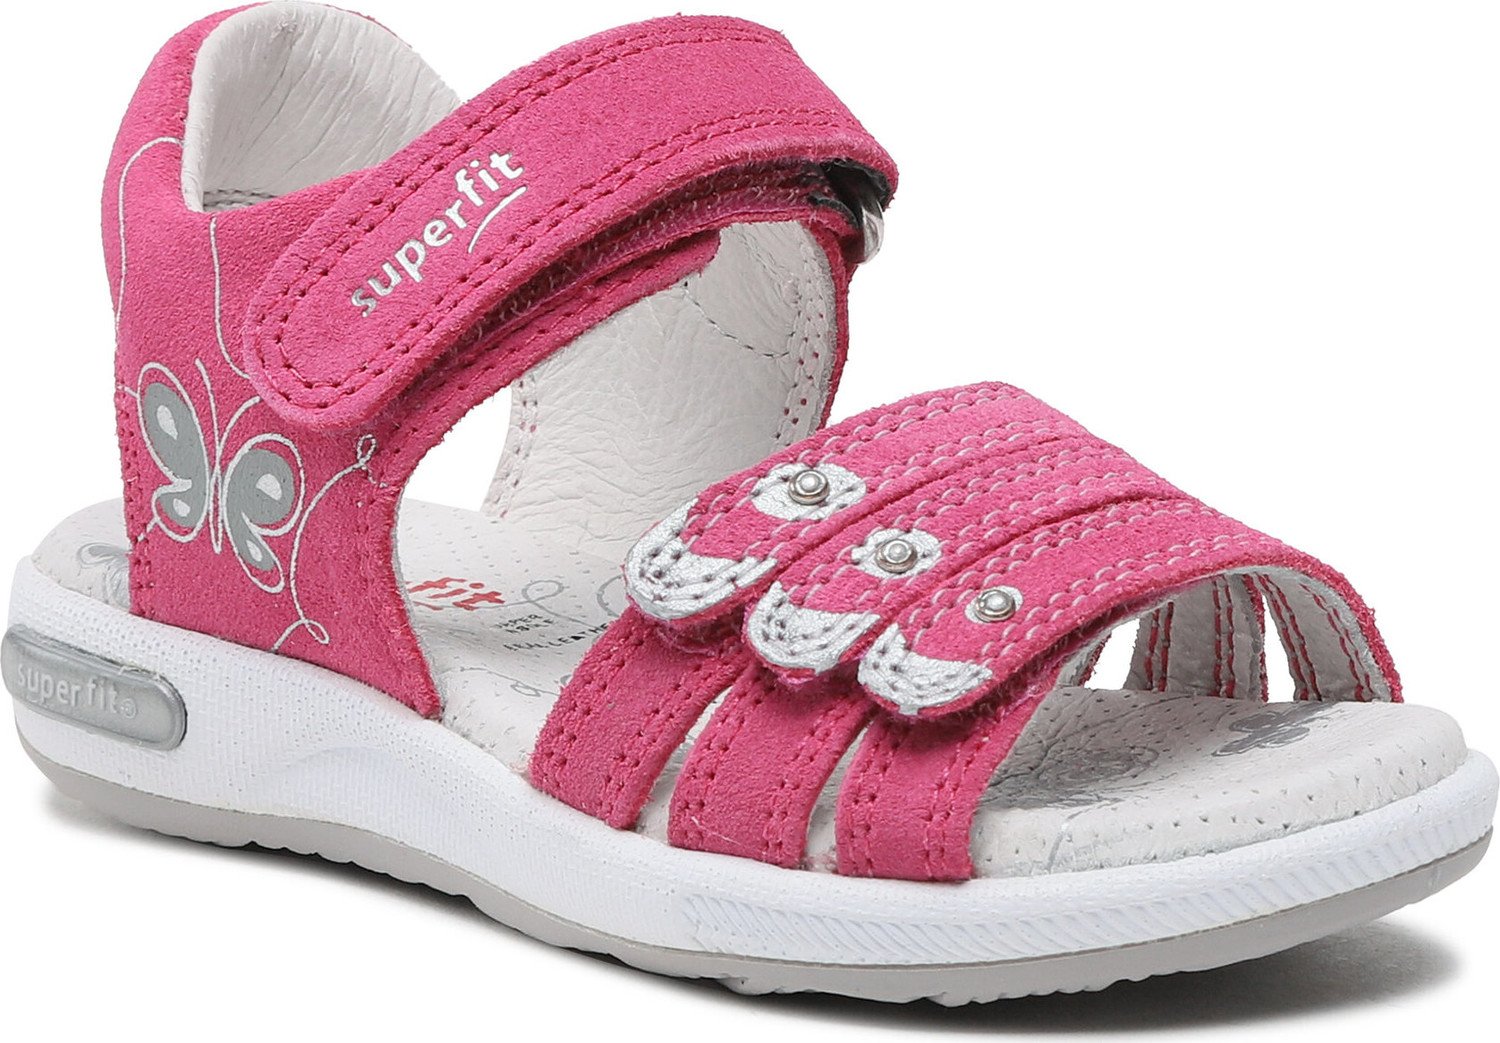 Sandály Superfit 1-006137-5510 M Pink/Silver